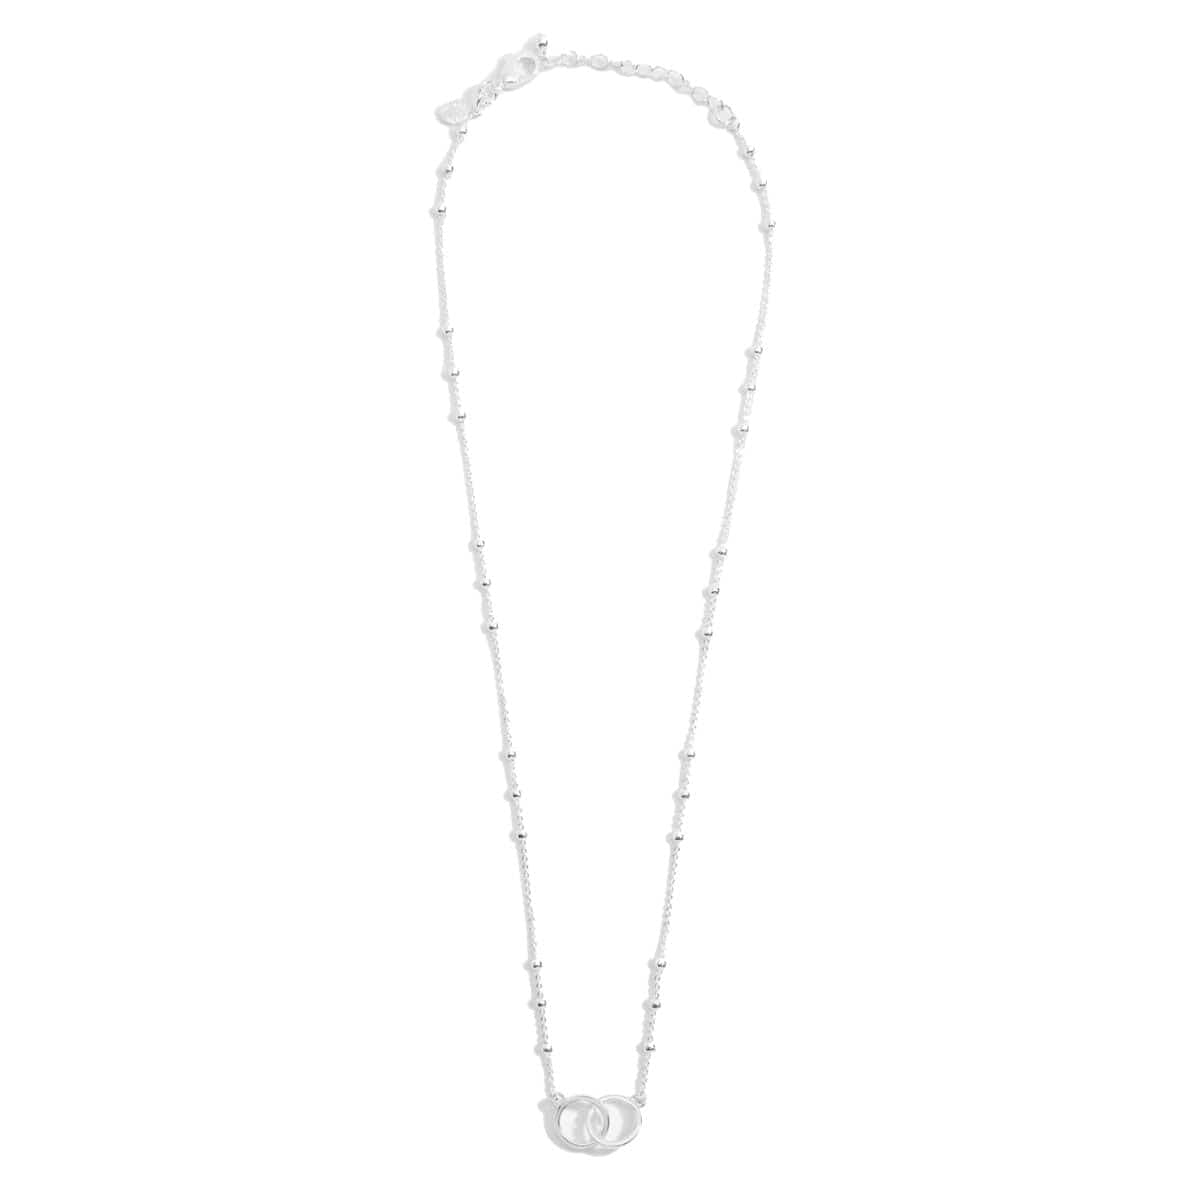 Joma Jewellery Necklace Joma Jewellery Forever Yours Necklace - Super Sister